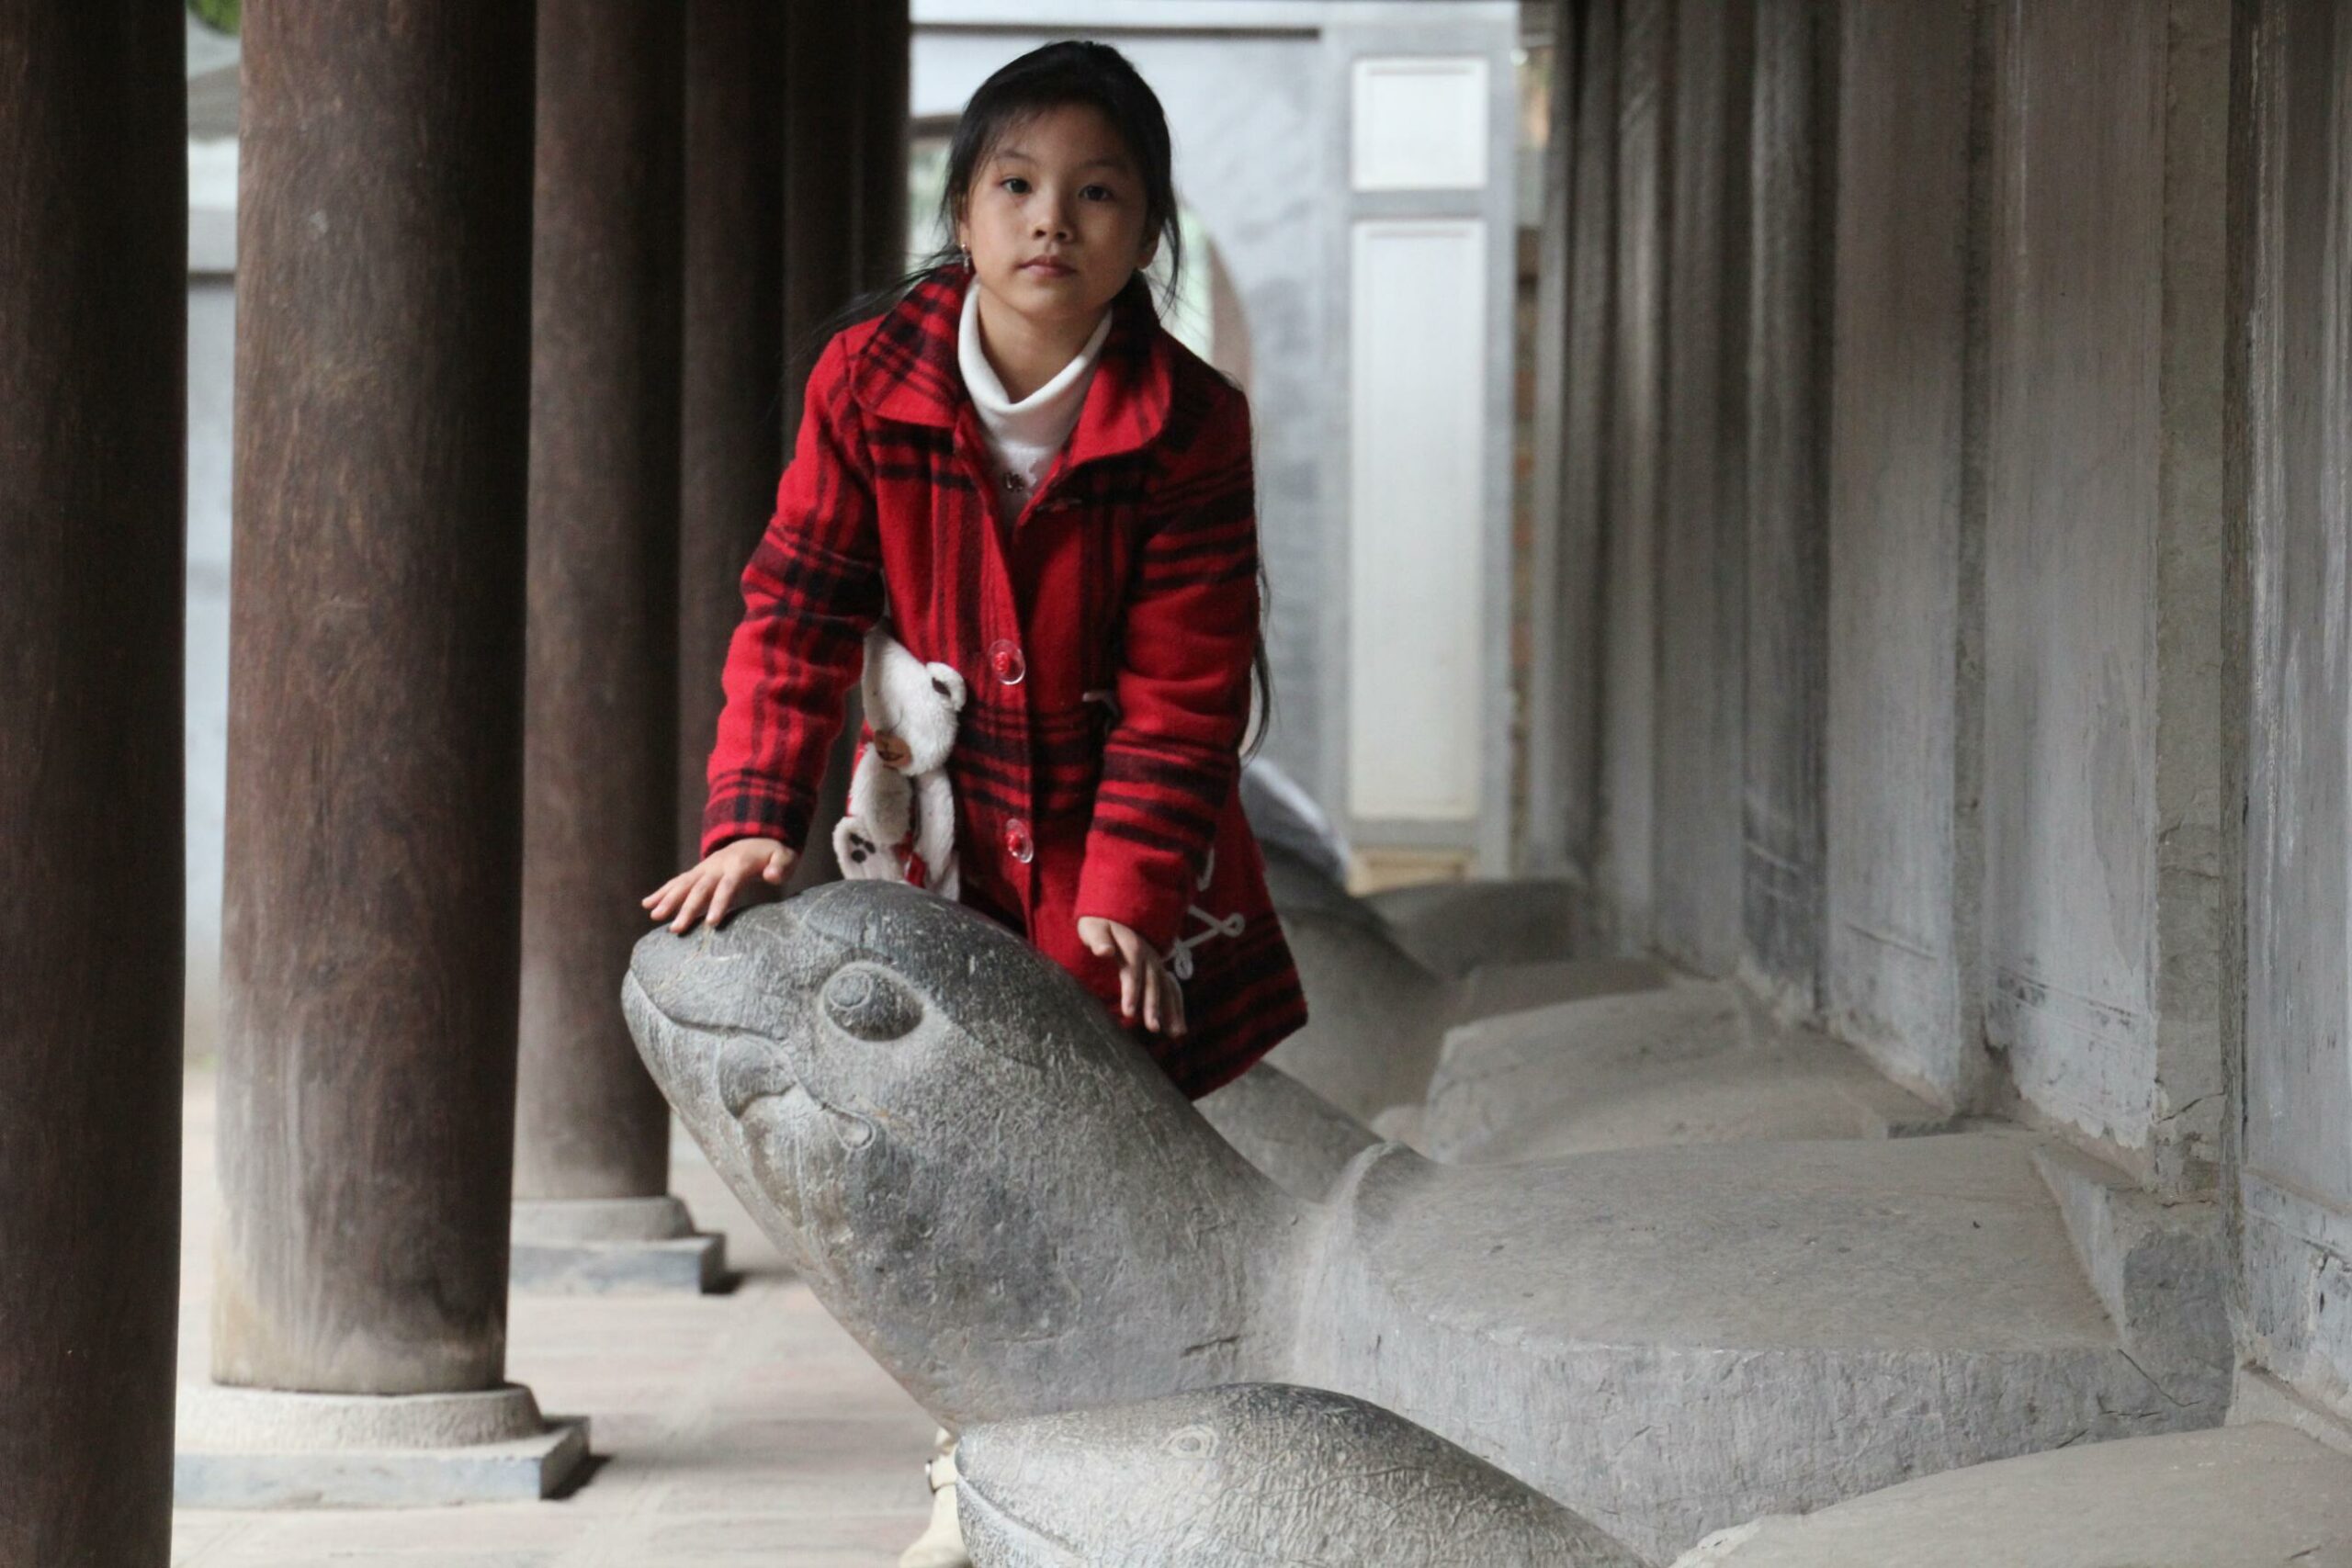 A young girl rubs the head of a statue of the Hoan Kiem turtle in Hanoi's Temple of Literature.